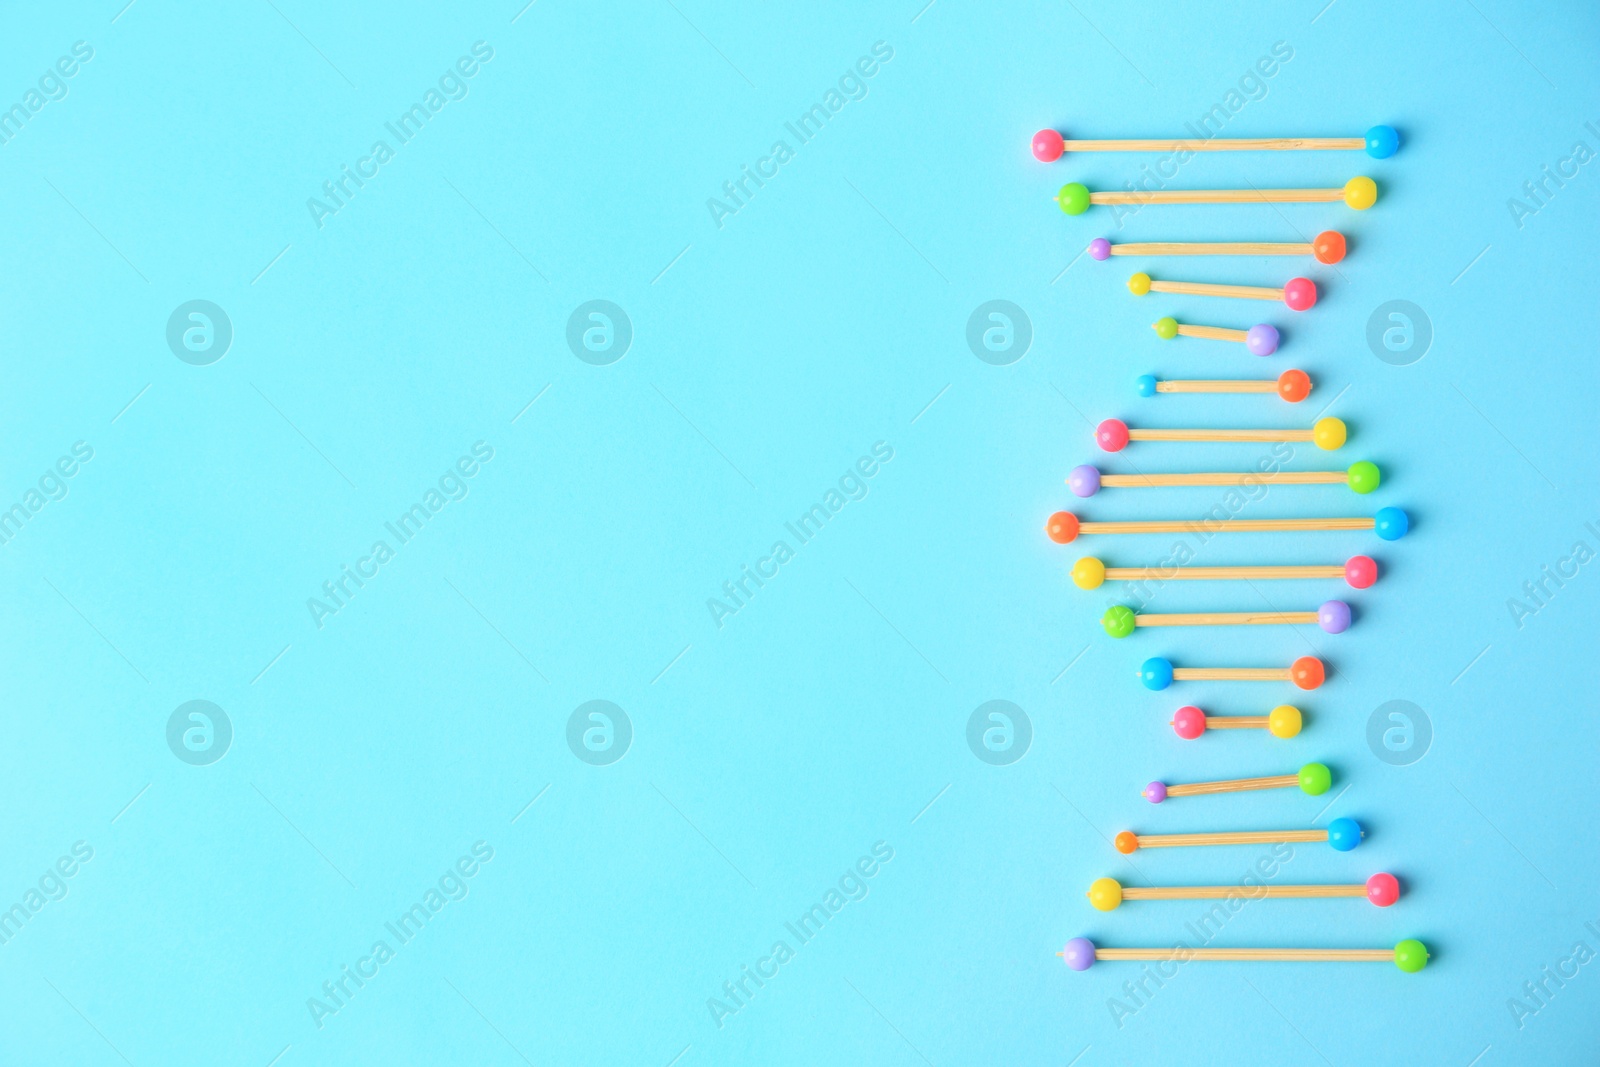 Photo of DNA molecule model made of toothpick and colorful beads on light blue background, flat lay. Space for text